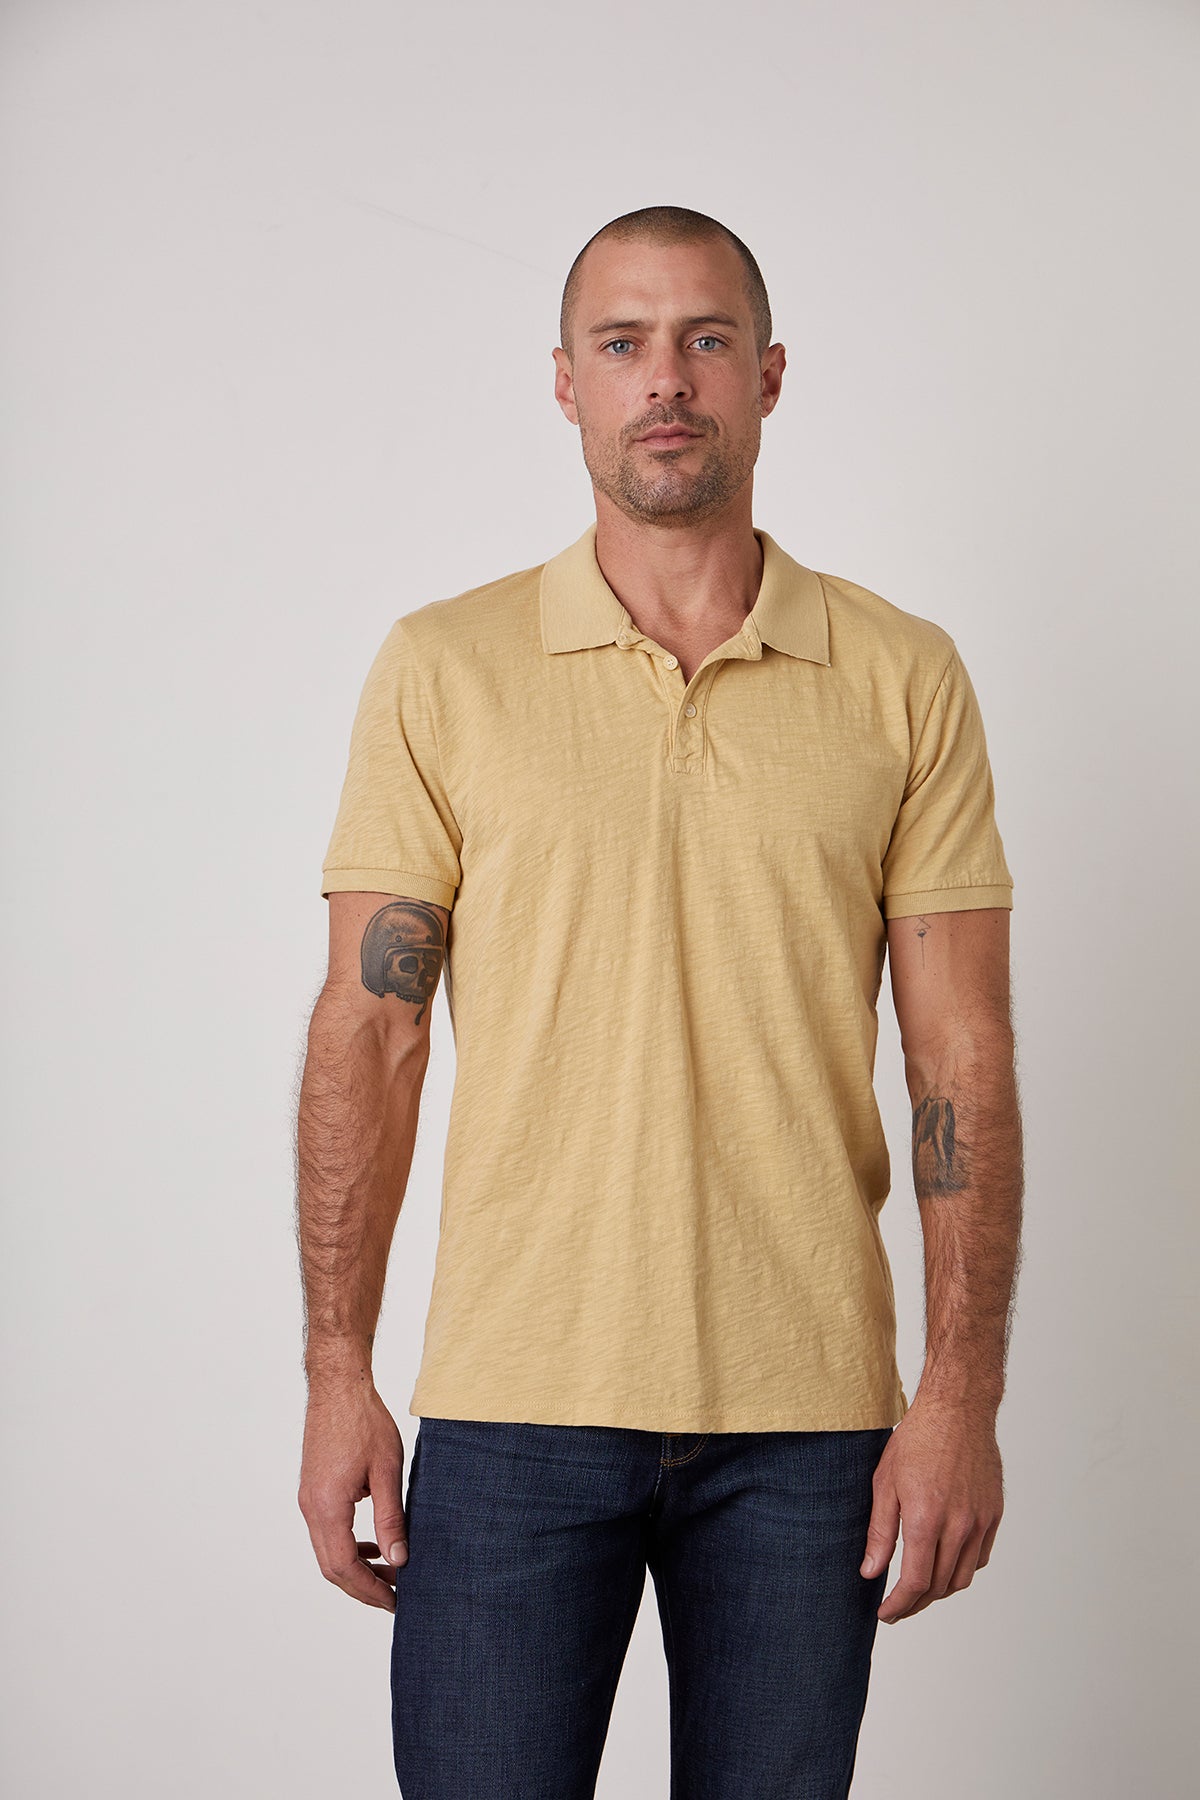 A man wearing a NIKO POLO by Velvet by Graham & Spencer, a classic polo-shirt silhouette in a yellow cotton slub.-25793857880257